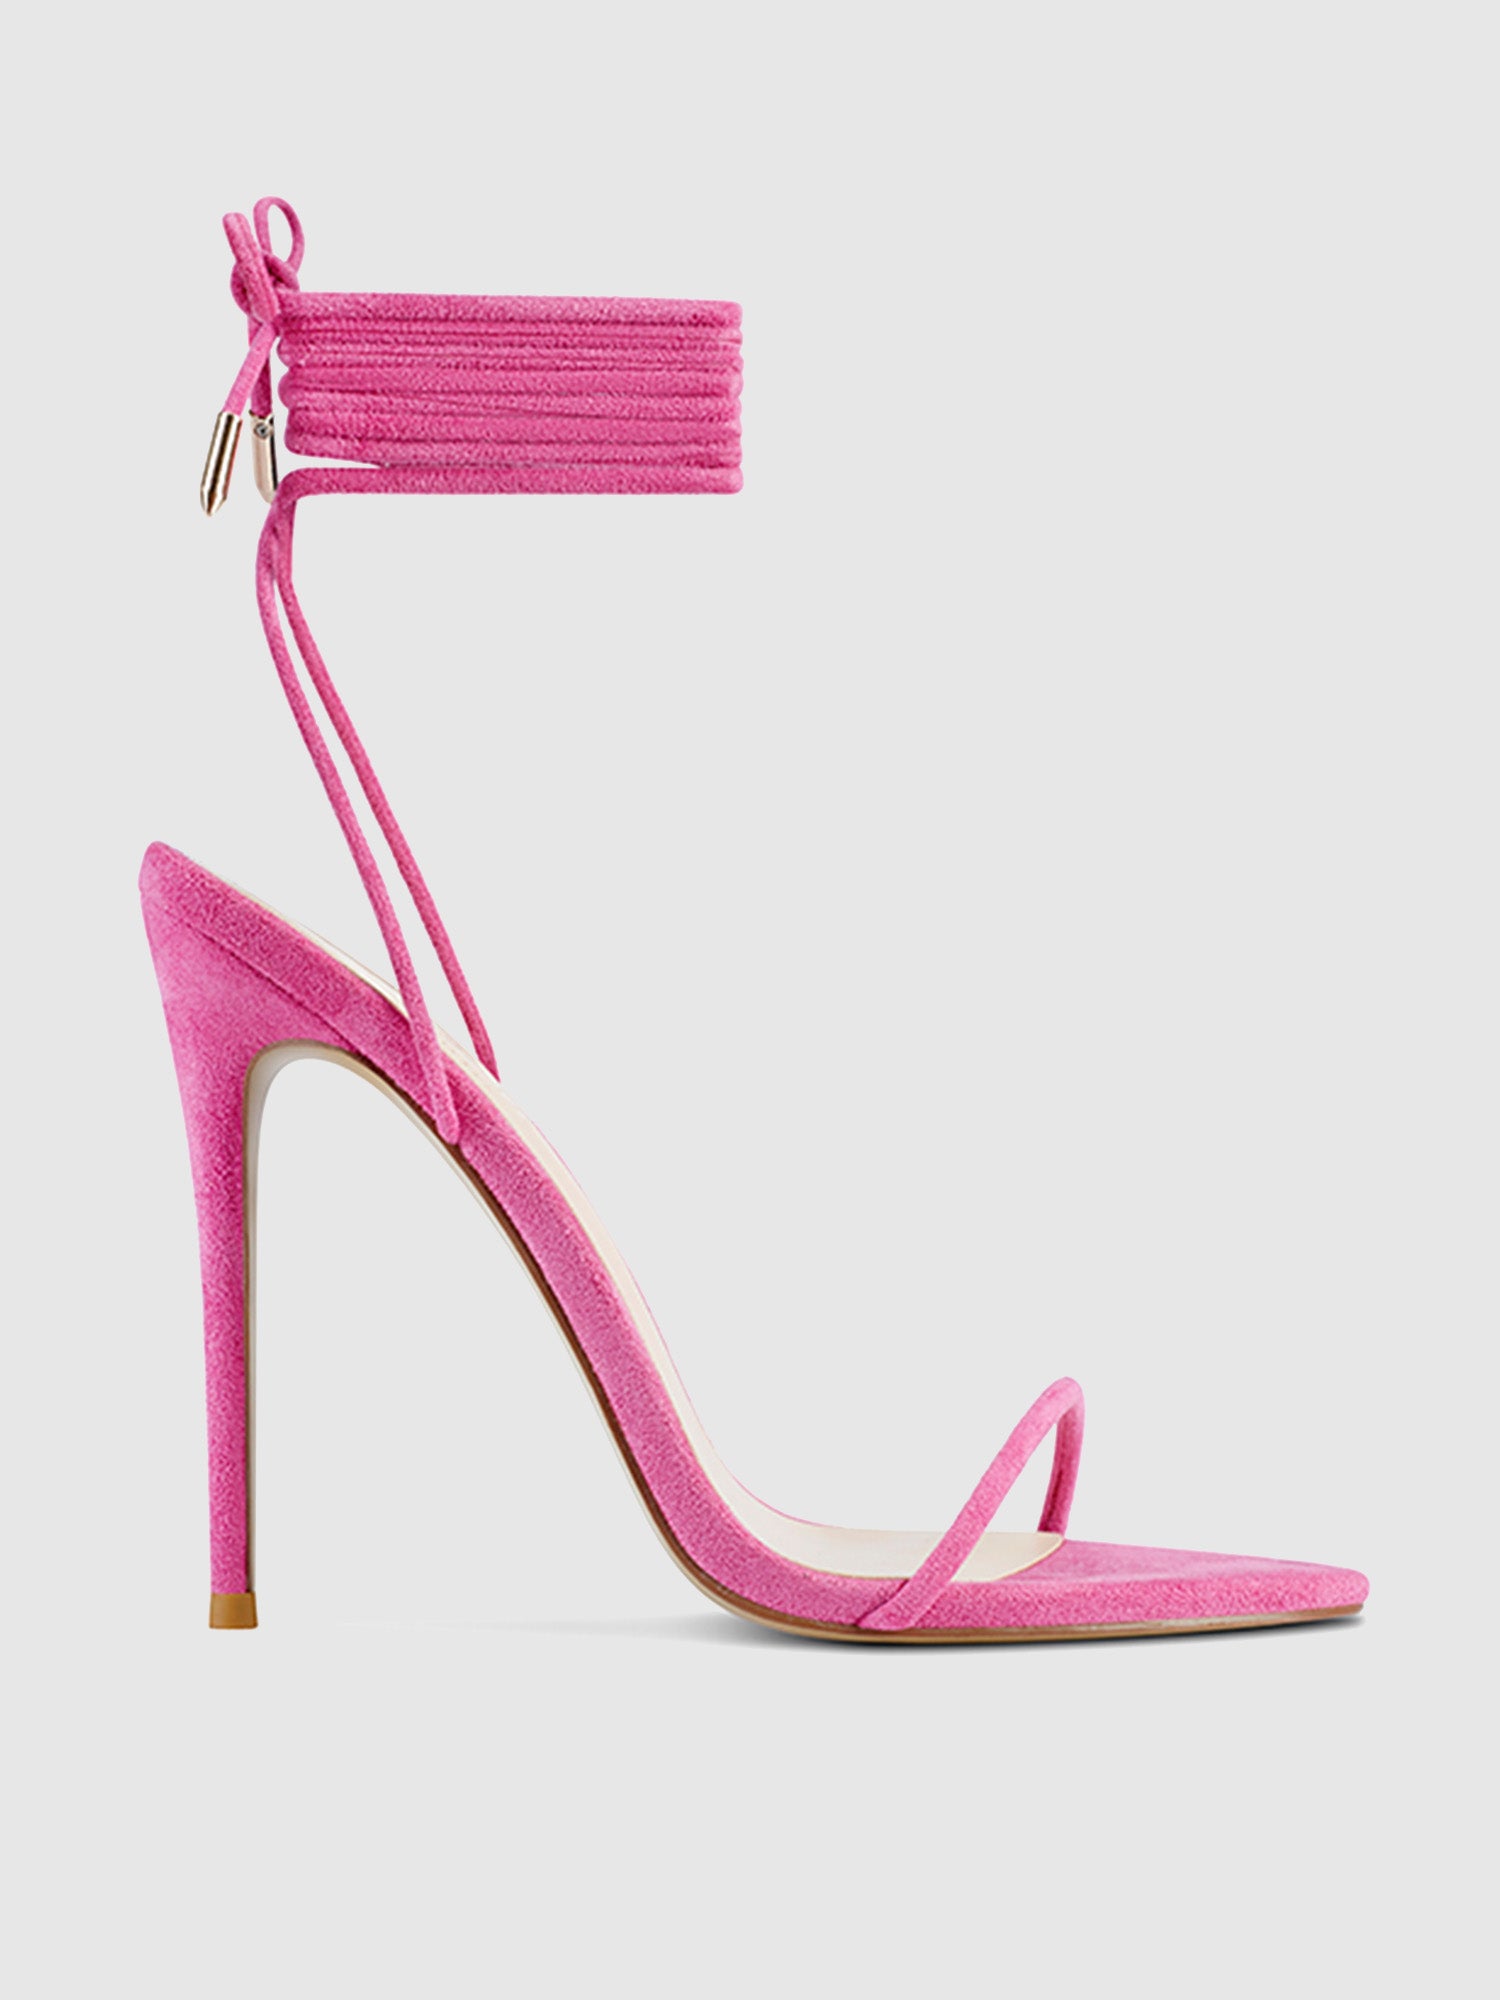 Vicenza Asymmetrical Strappy Heels | Anthropologie